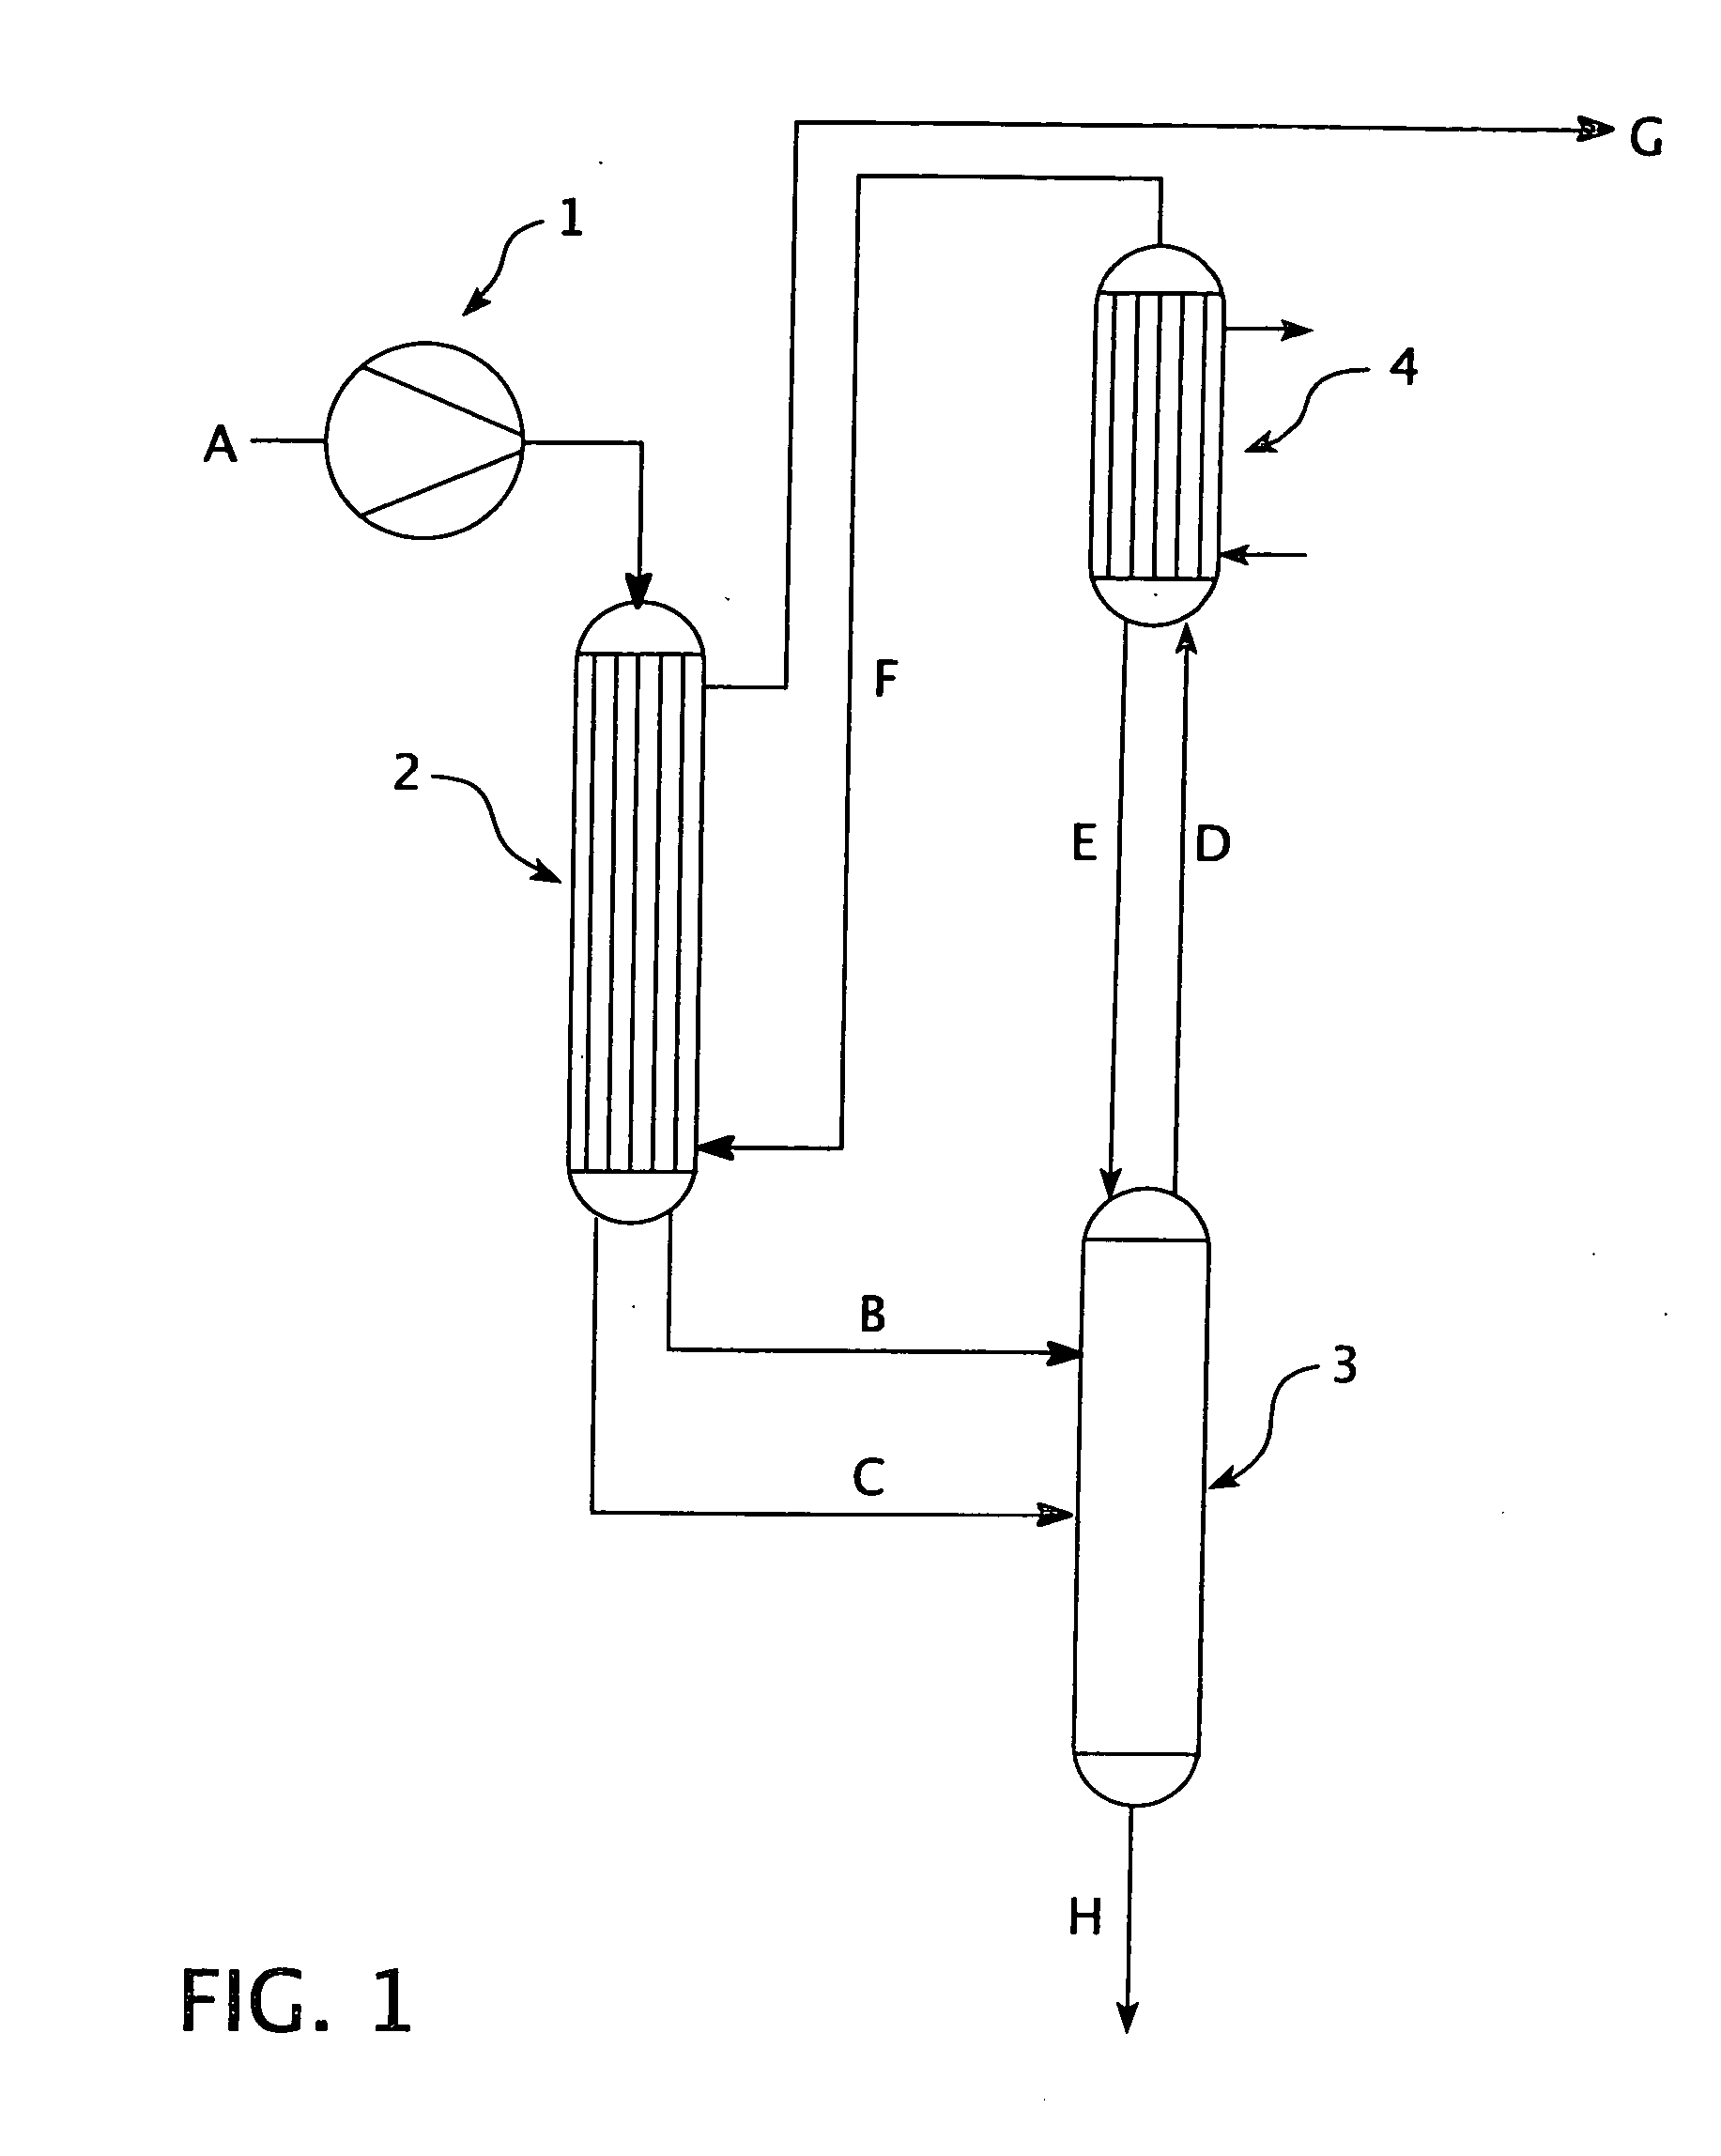 Enhanced process for the purification of anhydrous hydrogen chloride gas